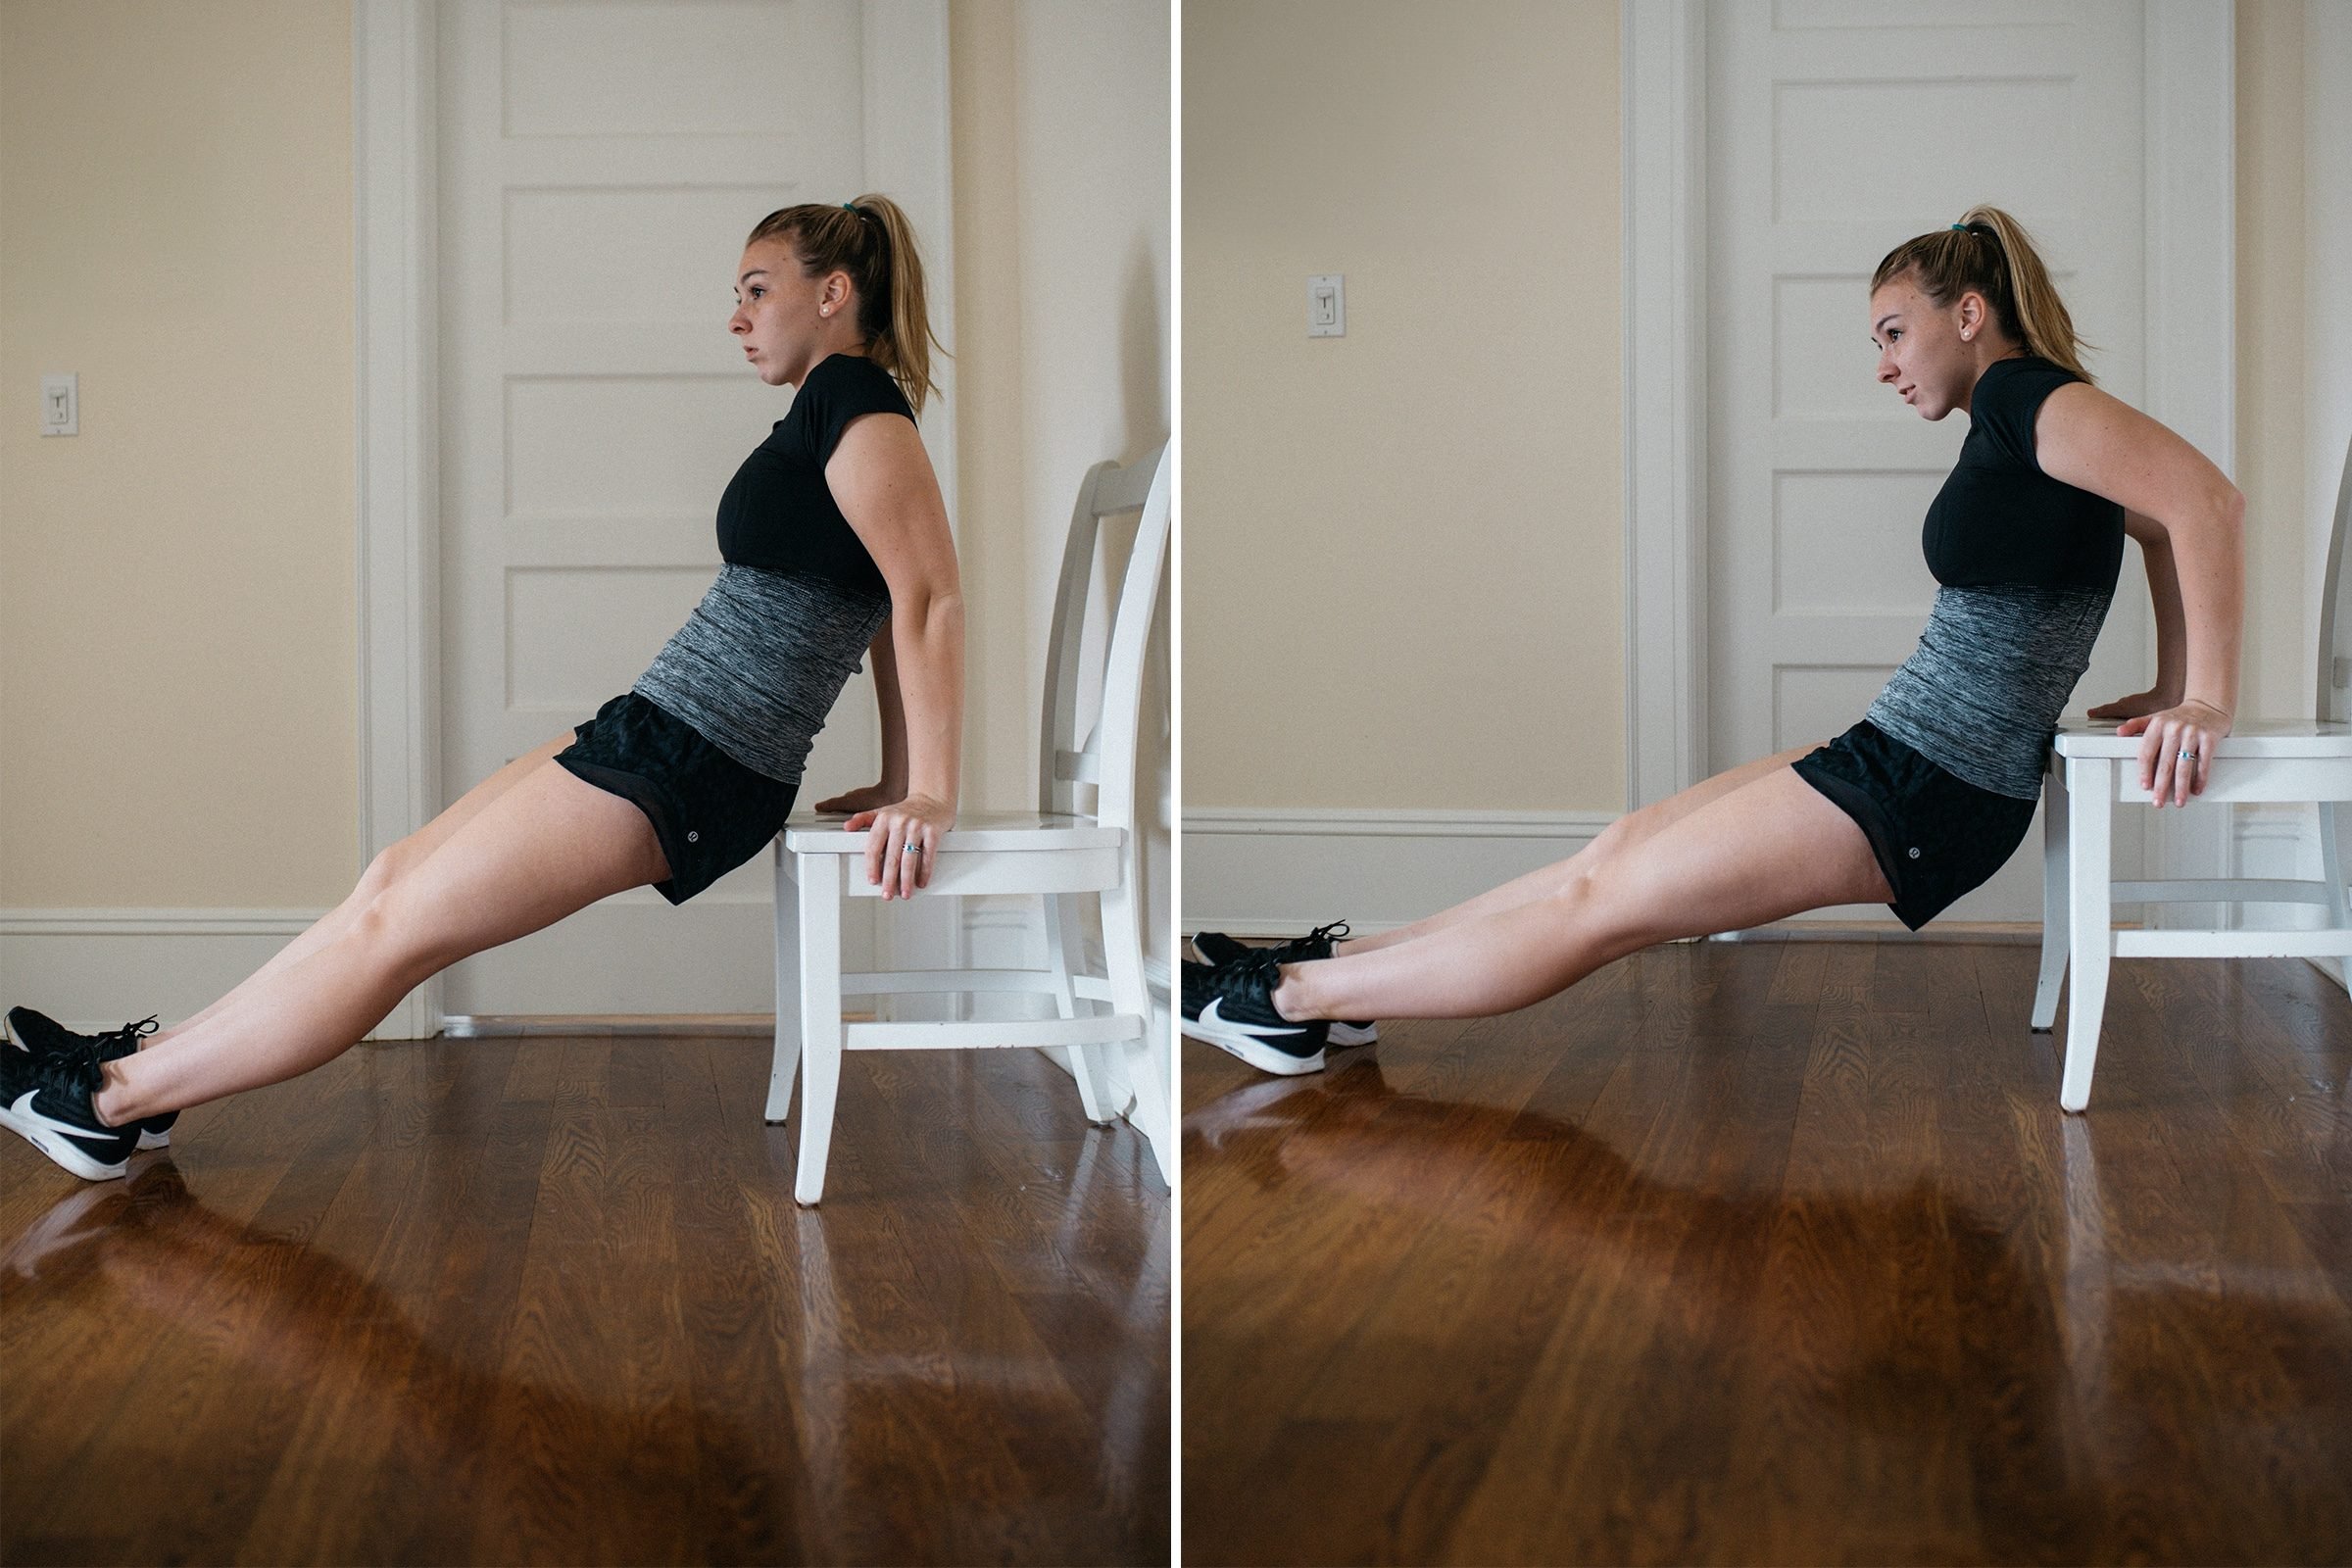 classic chair dip exercise